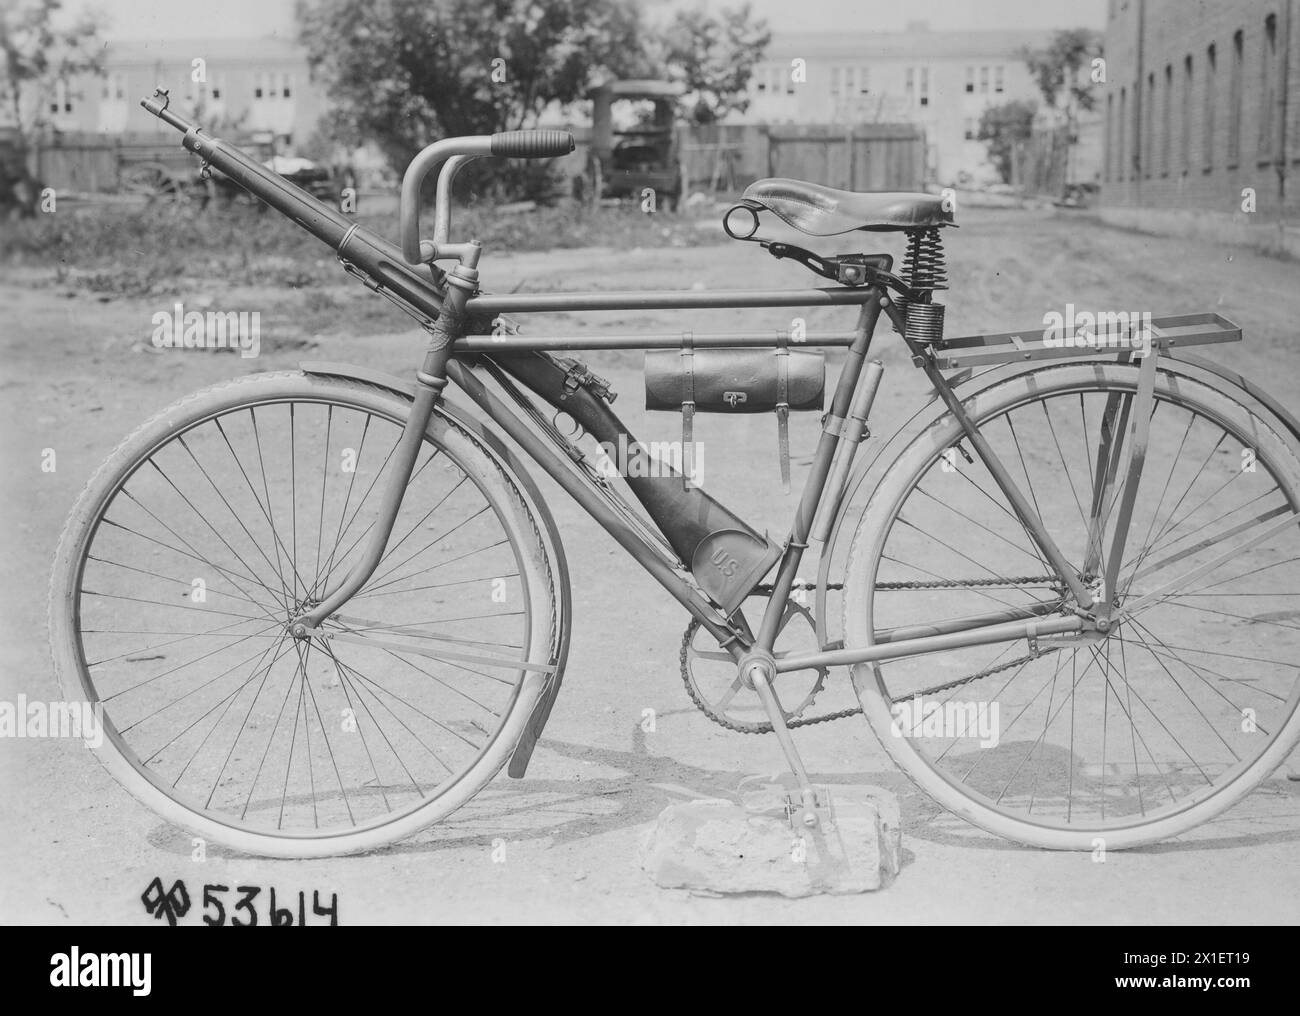 MILITARY BICYCE WITH RIFLE. Left side of bicycle with rifle ca. May 1919 Stock Photo